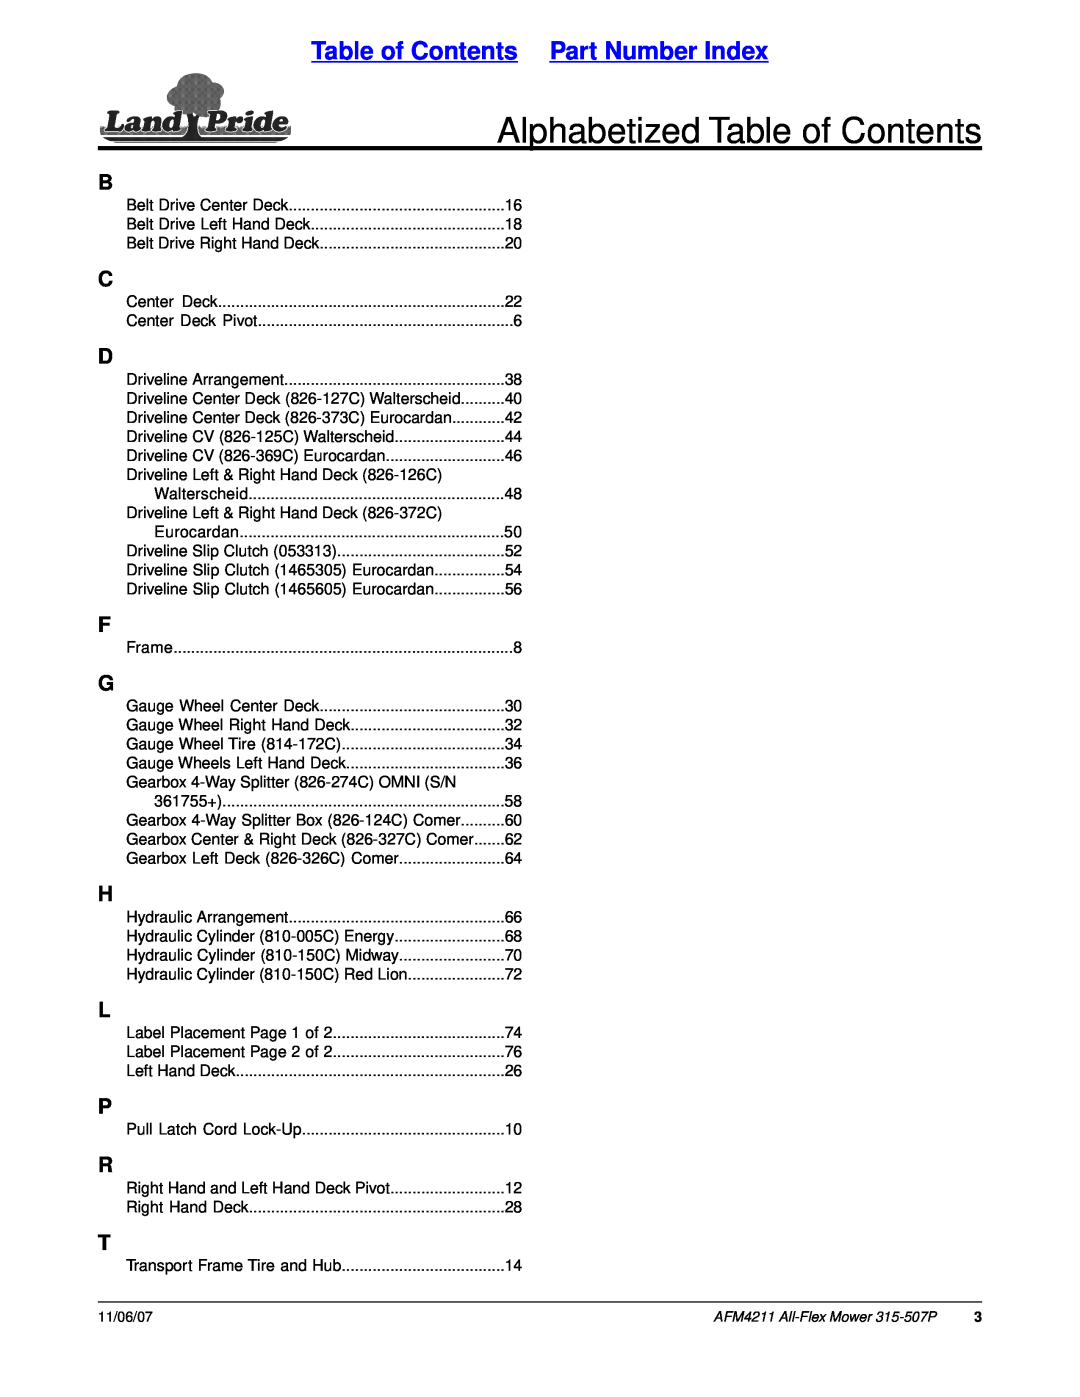 Land Pride All-Flex Mower, AFM4211, 315-507P manual Alphabetized Table of Contents, Table of Contents Part Number Index 